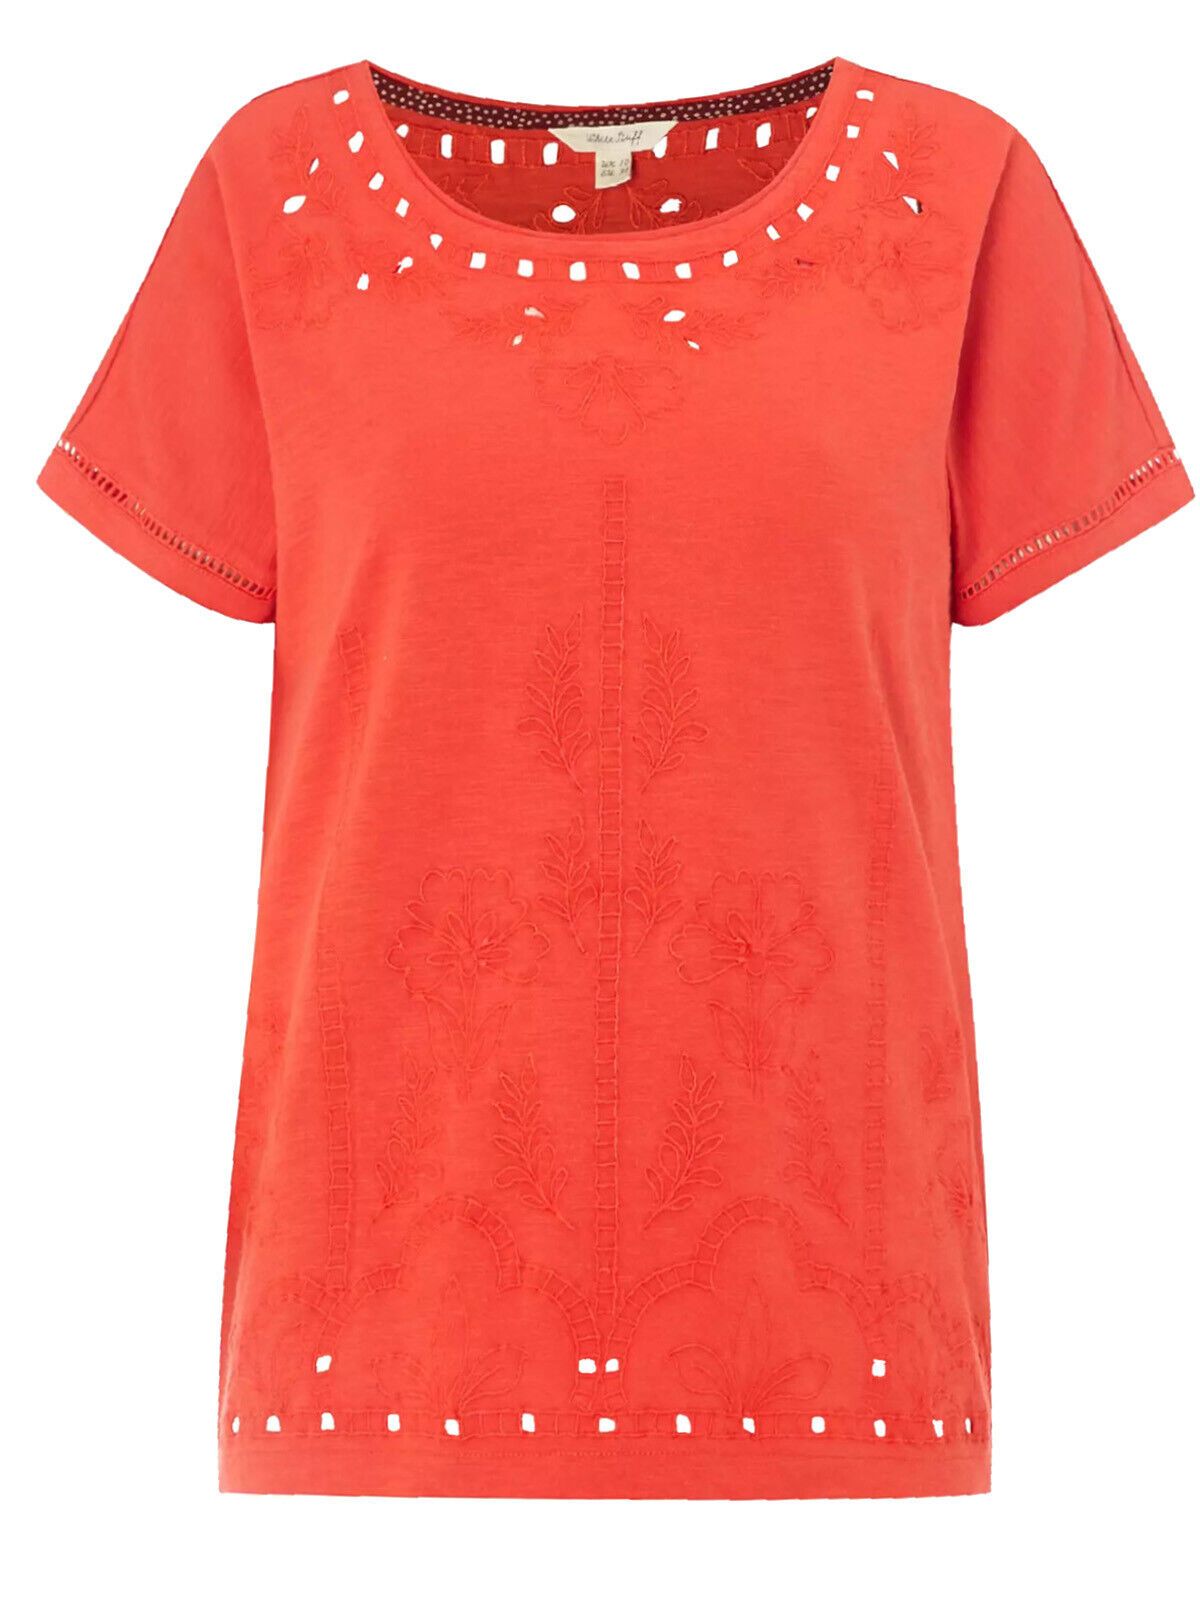 EX White Stuff Indian Orange Joyce Embroidered Jersey T-Shirt in Size 10